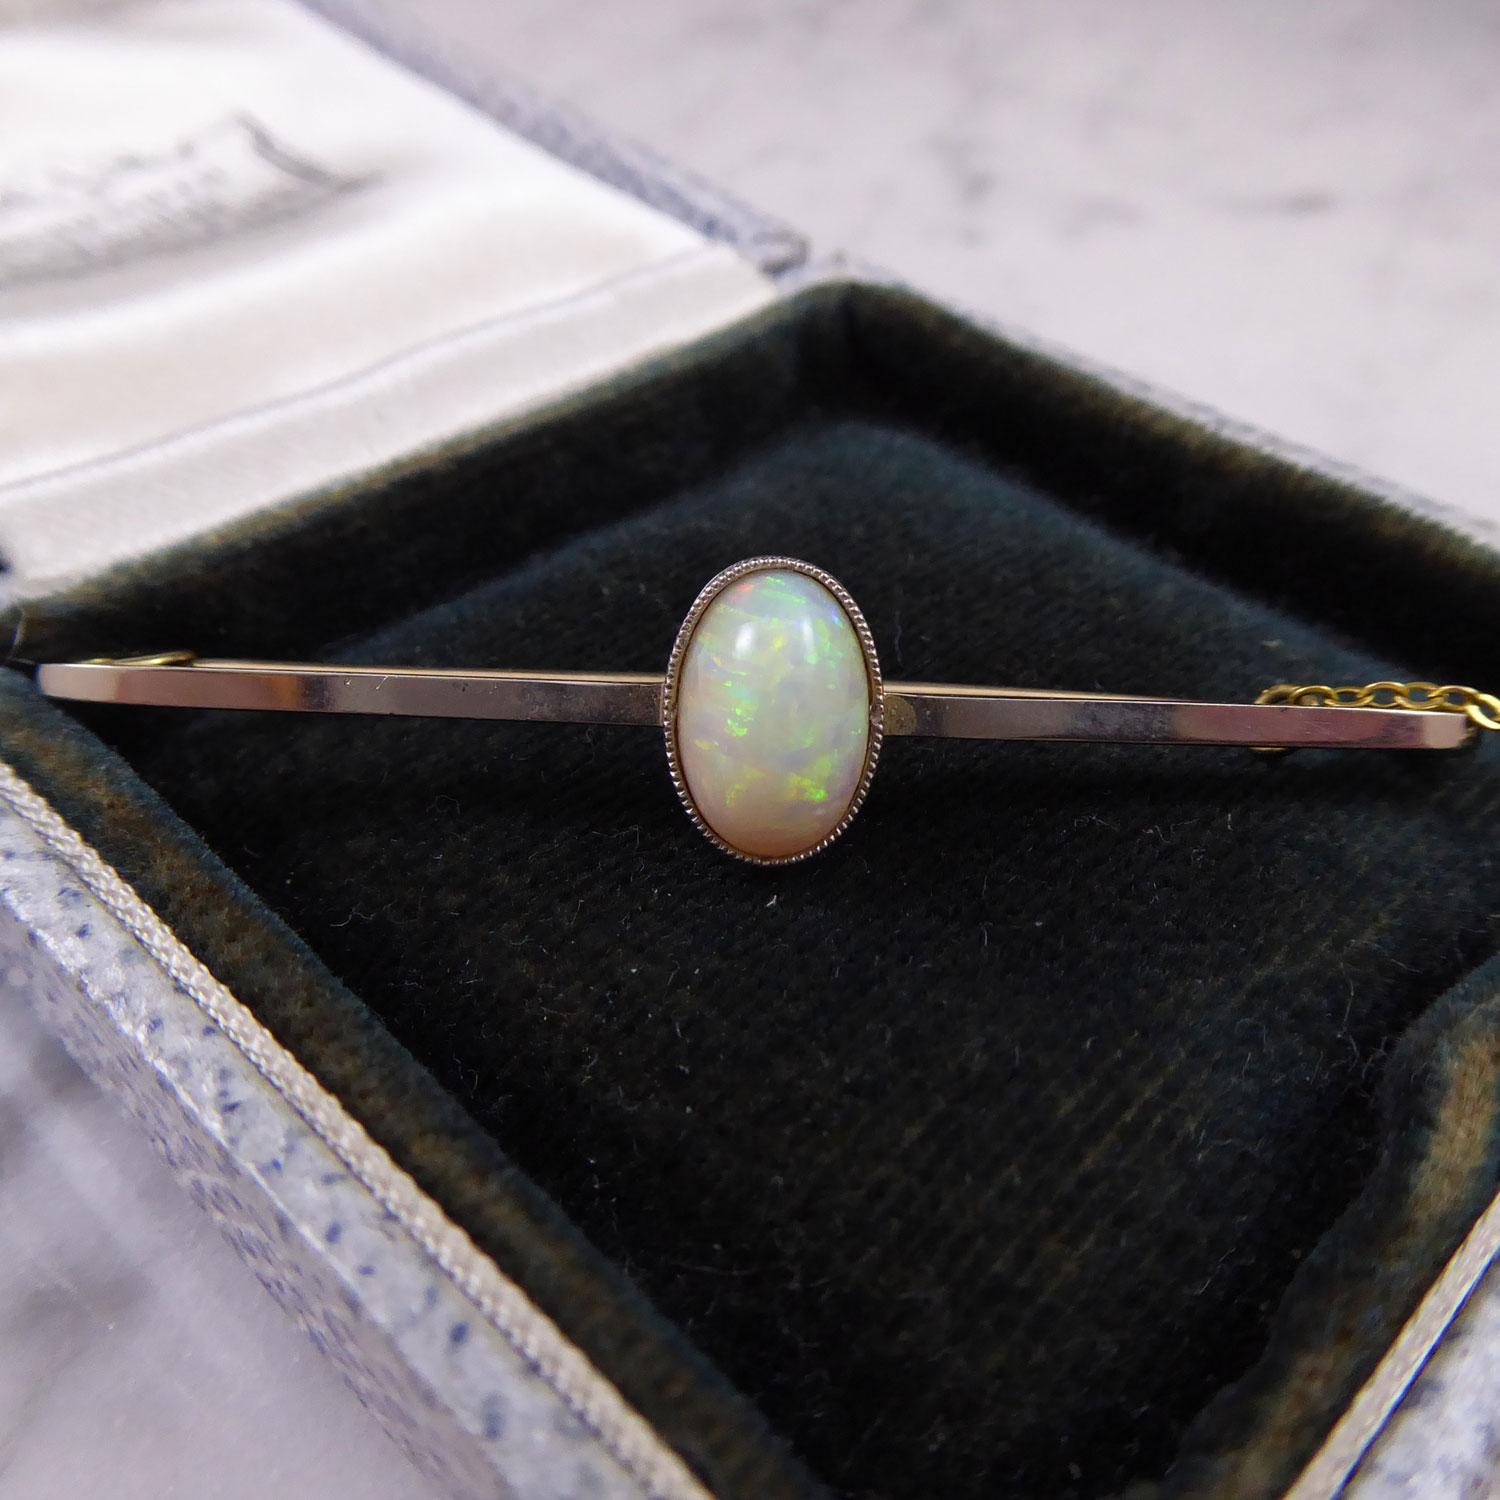 Women's Edwardian Cabochon Opal Bar Brooch in Platinum-Topped 15ct Gold